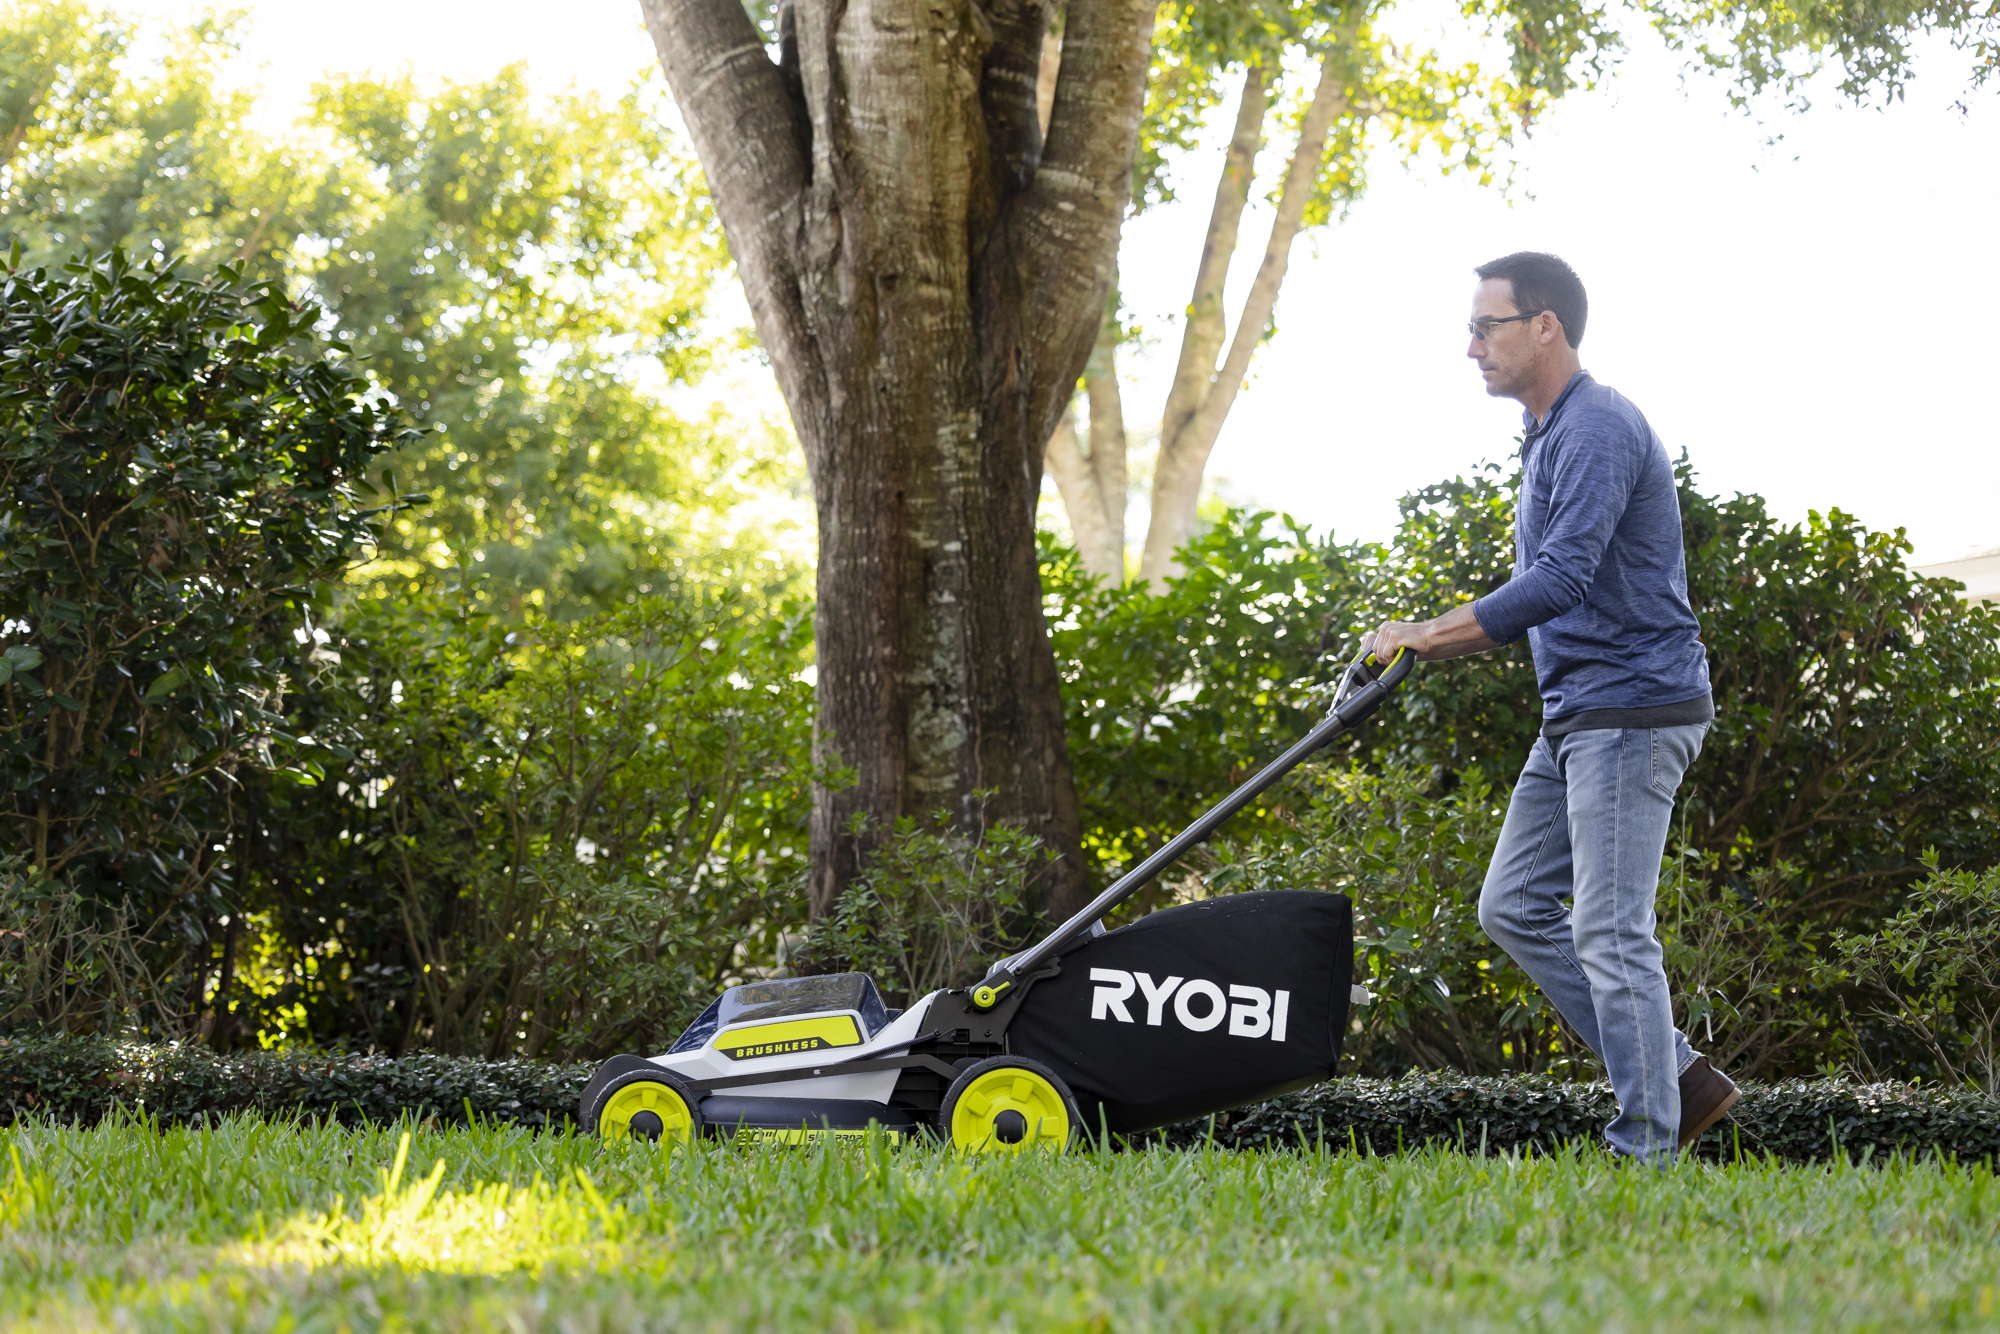 Ryobi RY401180 40V HP Brushless 20 Self-Propelled Mower Review: The  Best-Selling Lawn Mower - TechWalls